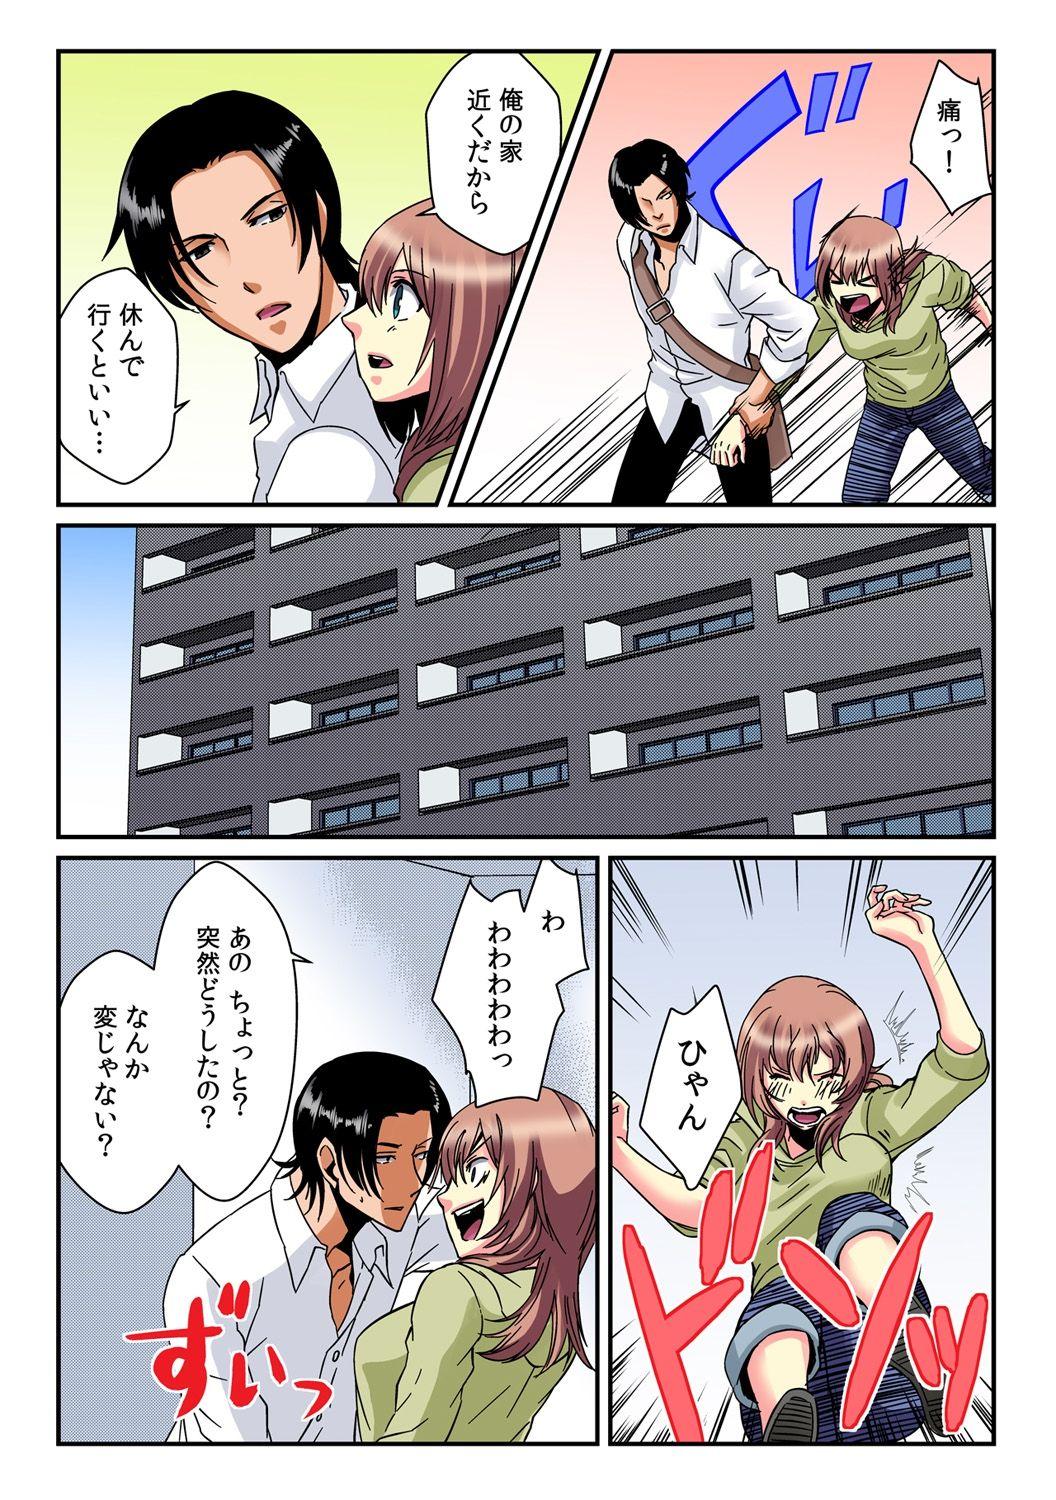 [Akagi Gijou / Akahige] I became a girl- and I definitely can't let anyone find out! (Full color) 1 16